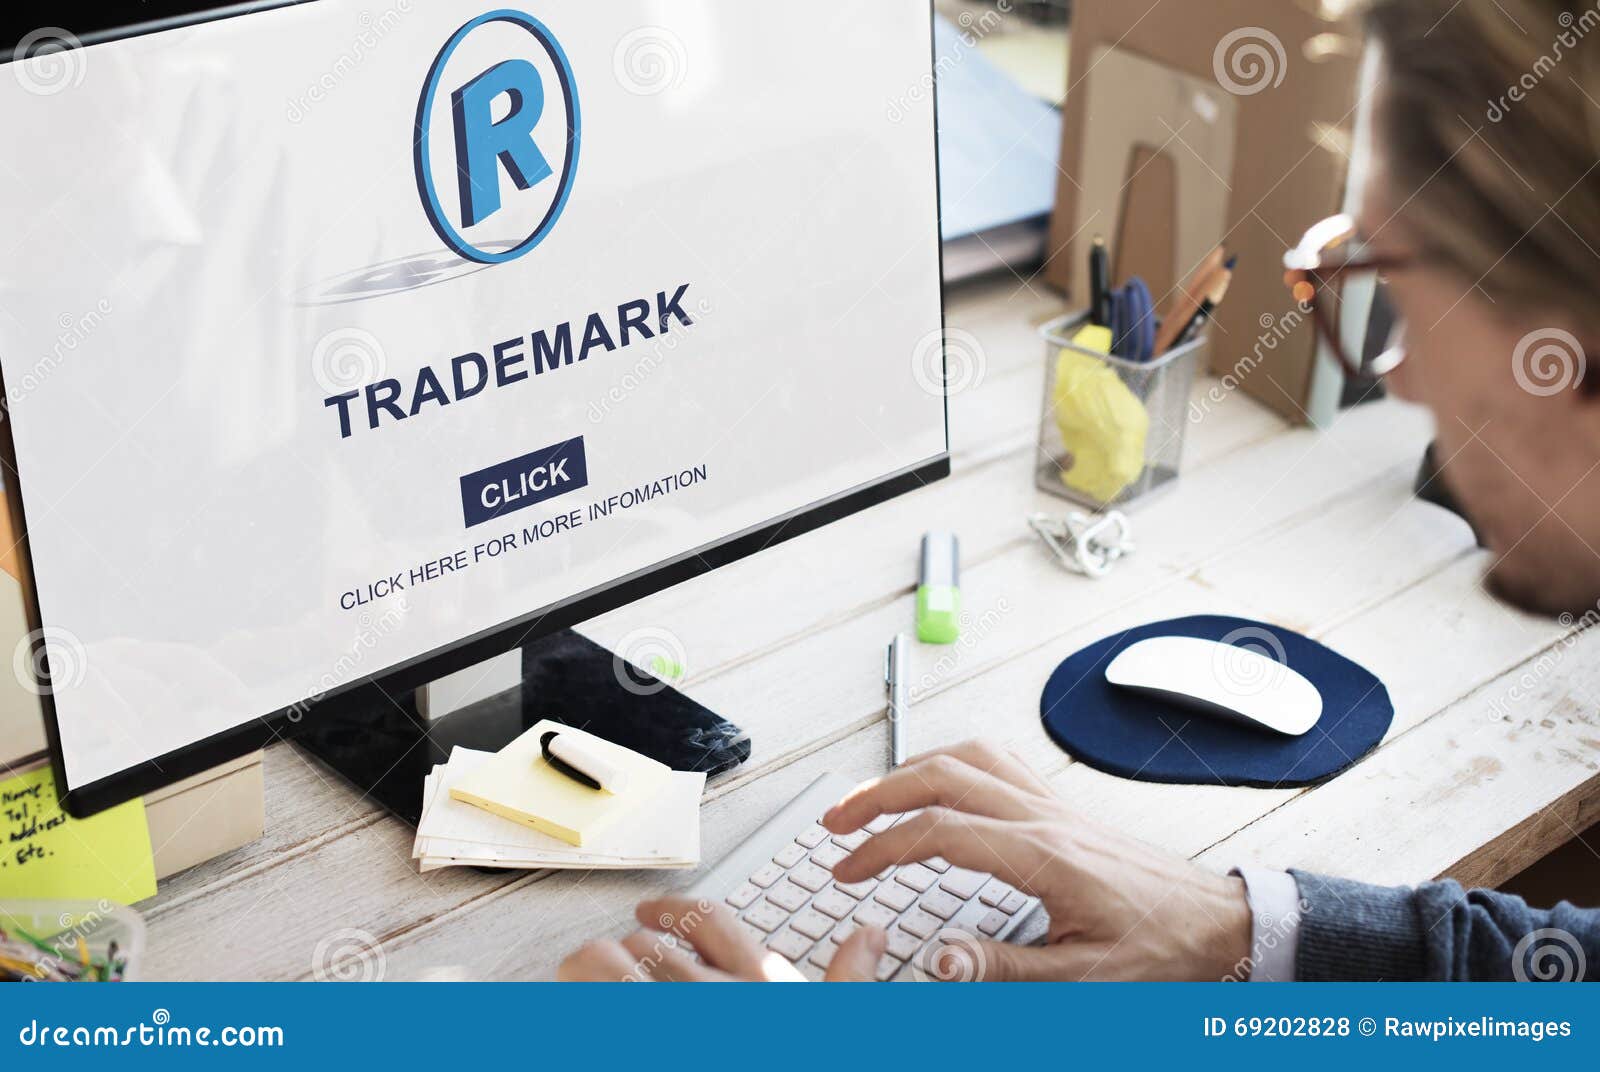 trademark brand rights protection copyright concept